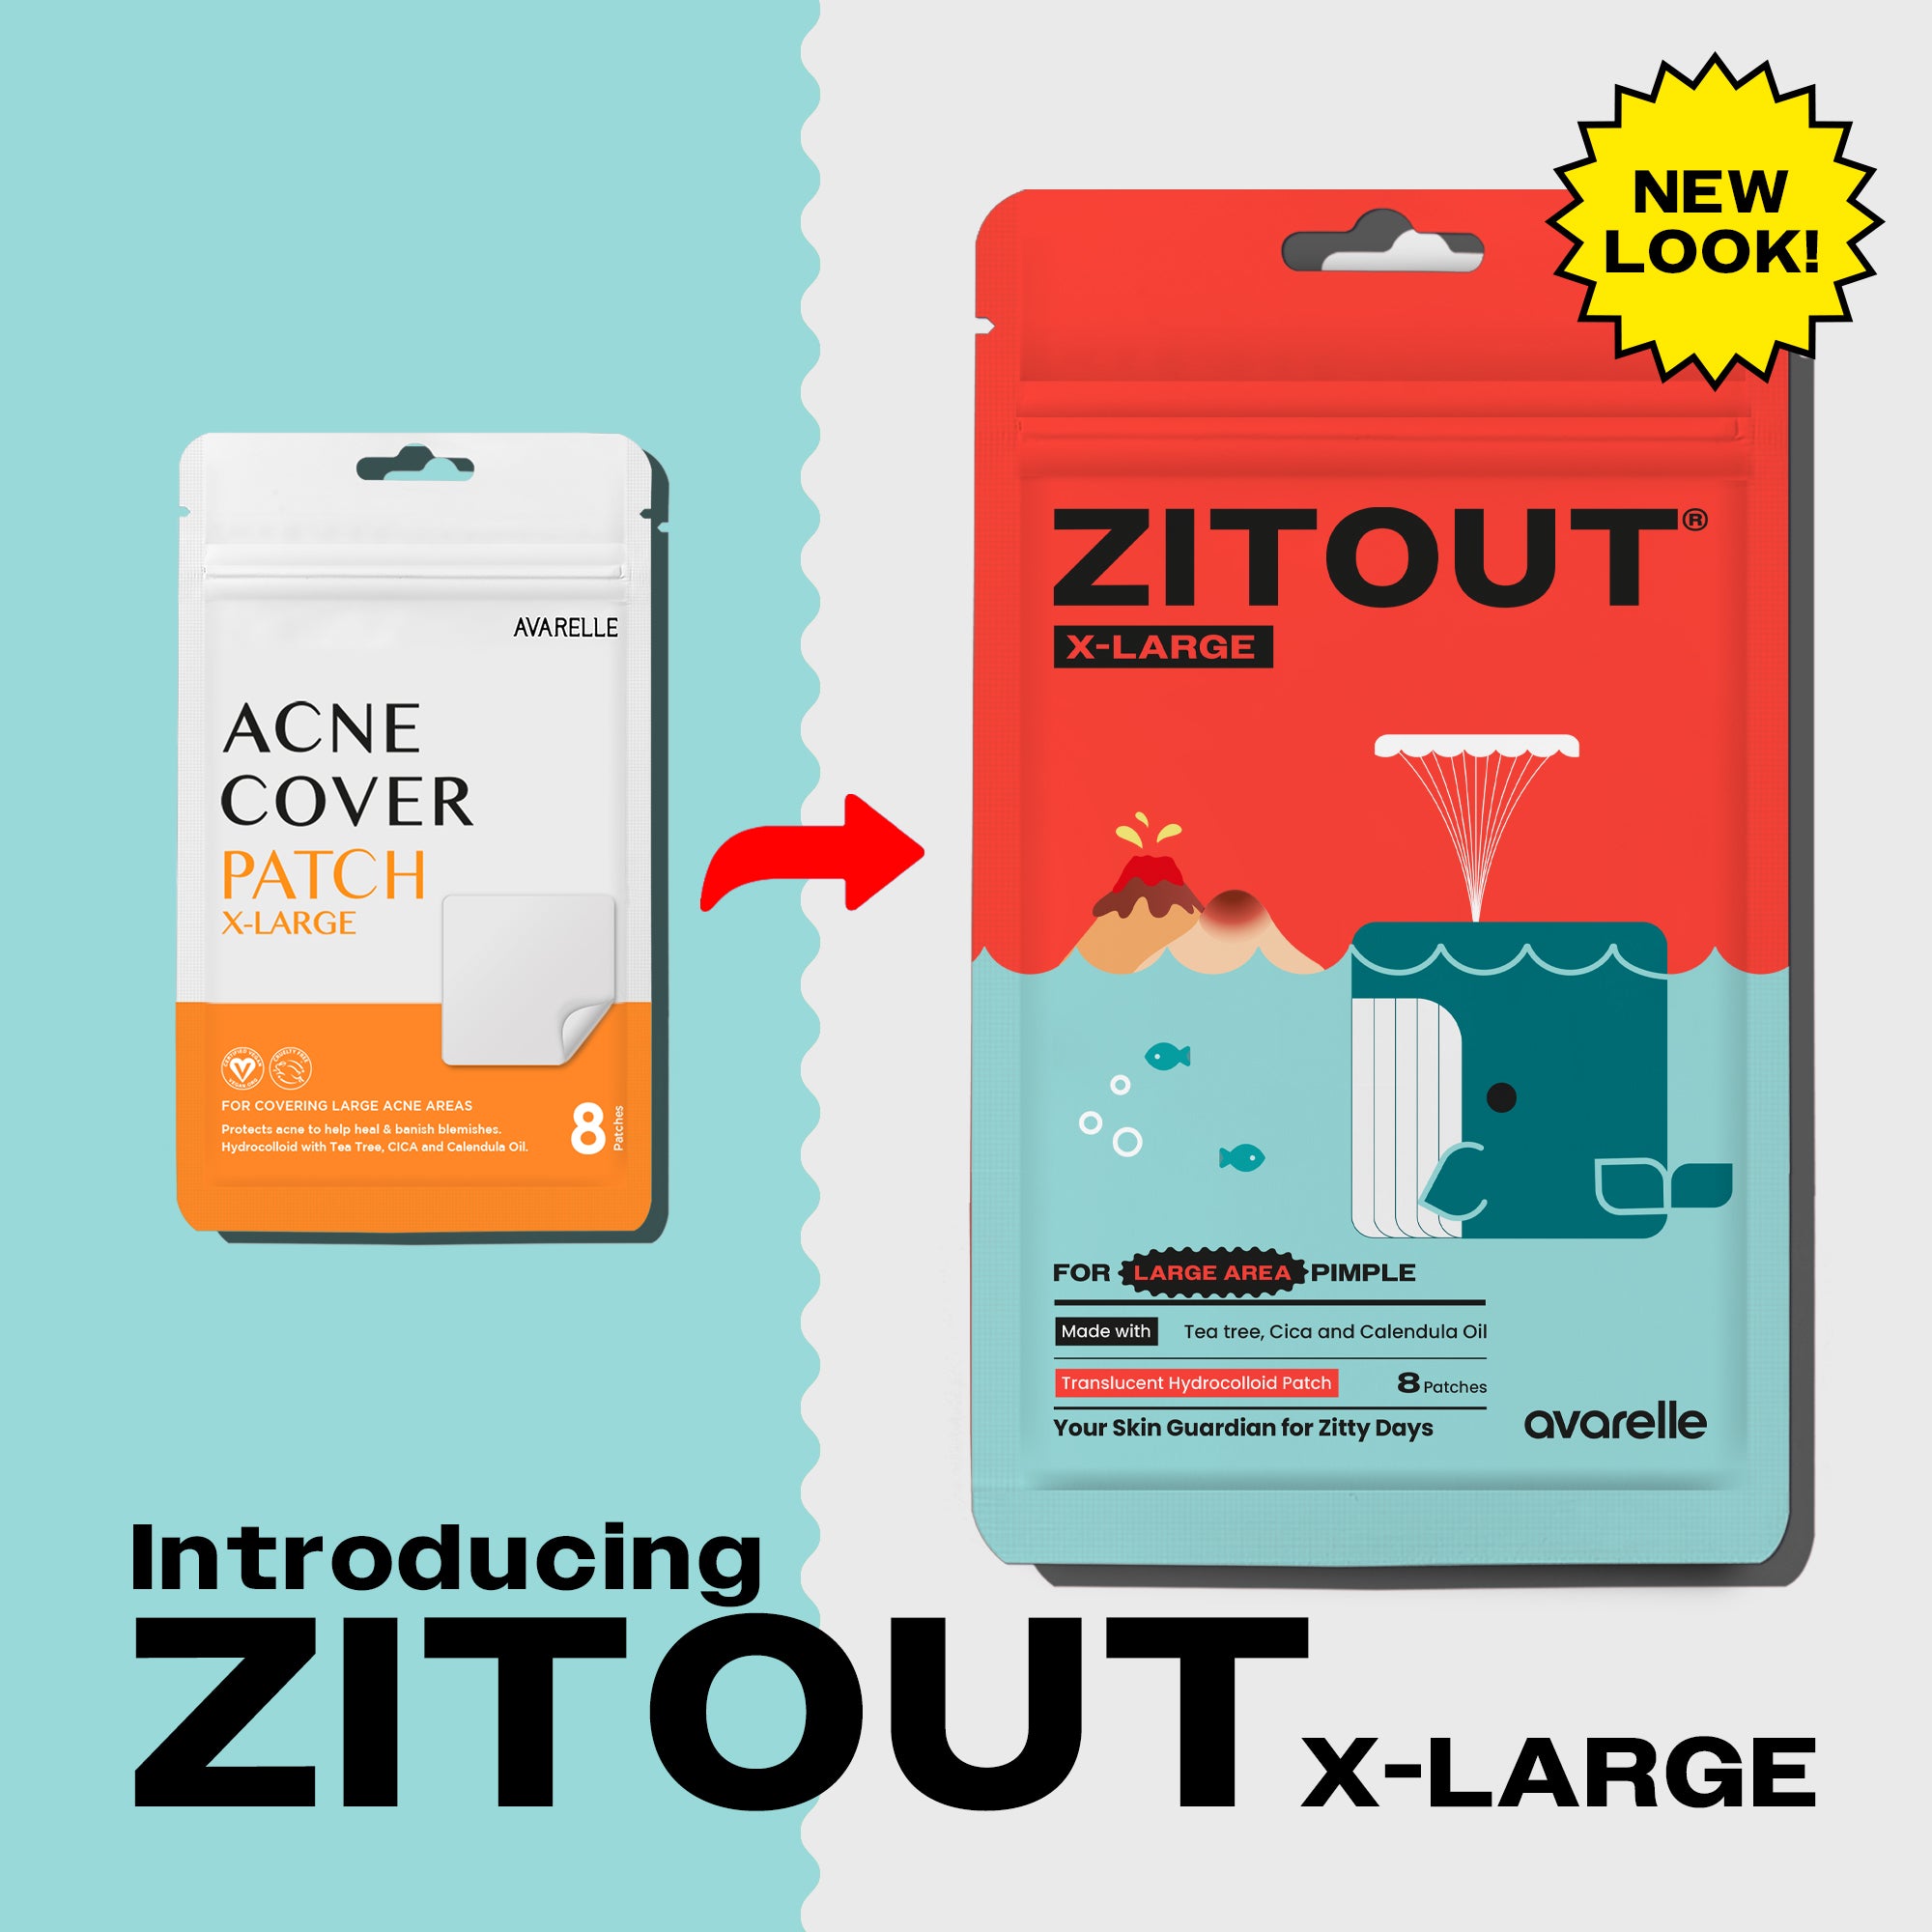 ZITOUT® X-Large 8CT | Acne Cover Pimple Patches for Face | Acne Spot Dots for All Skin Types | Alcohol Free Paraben Free Vegan Cruelty Free